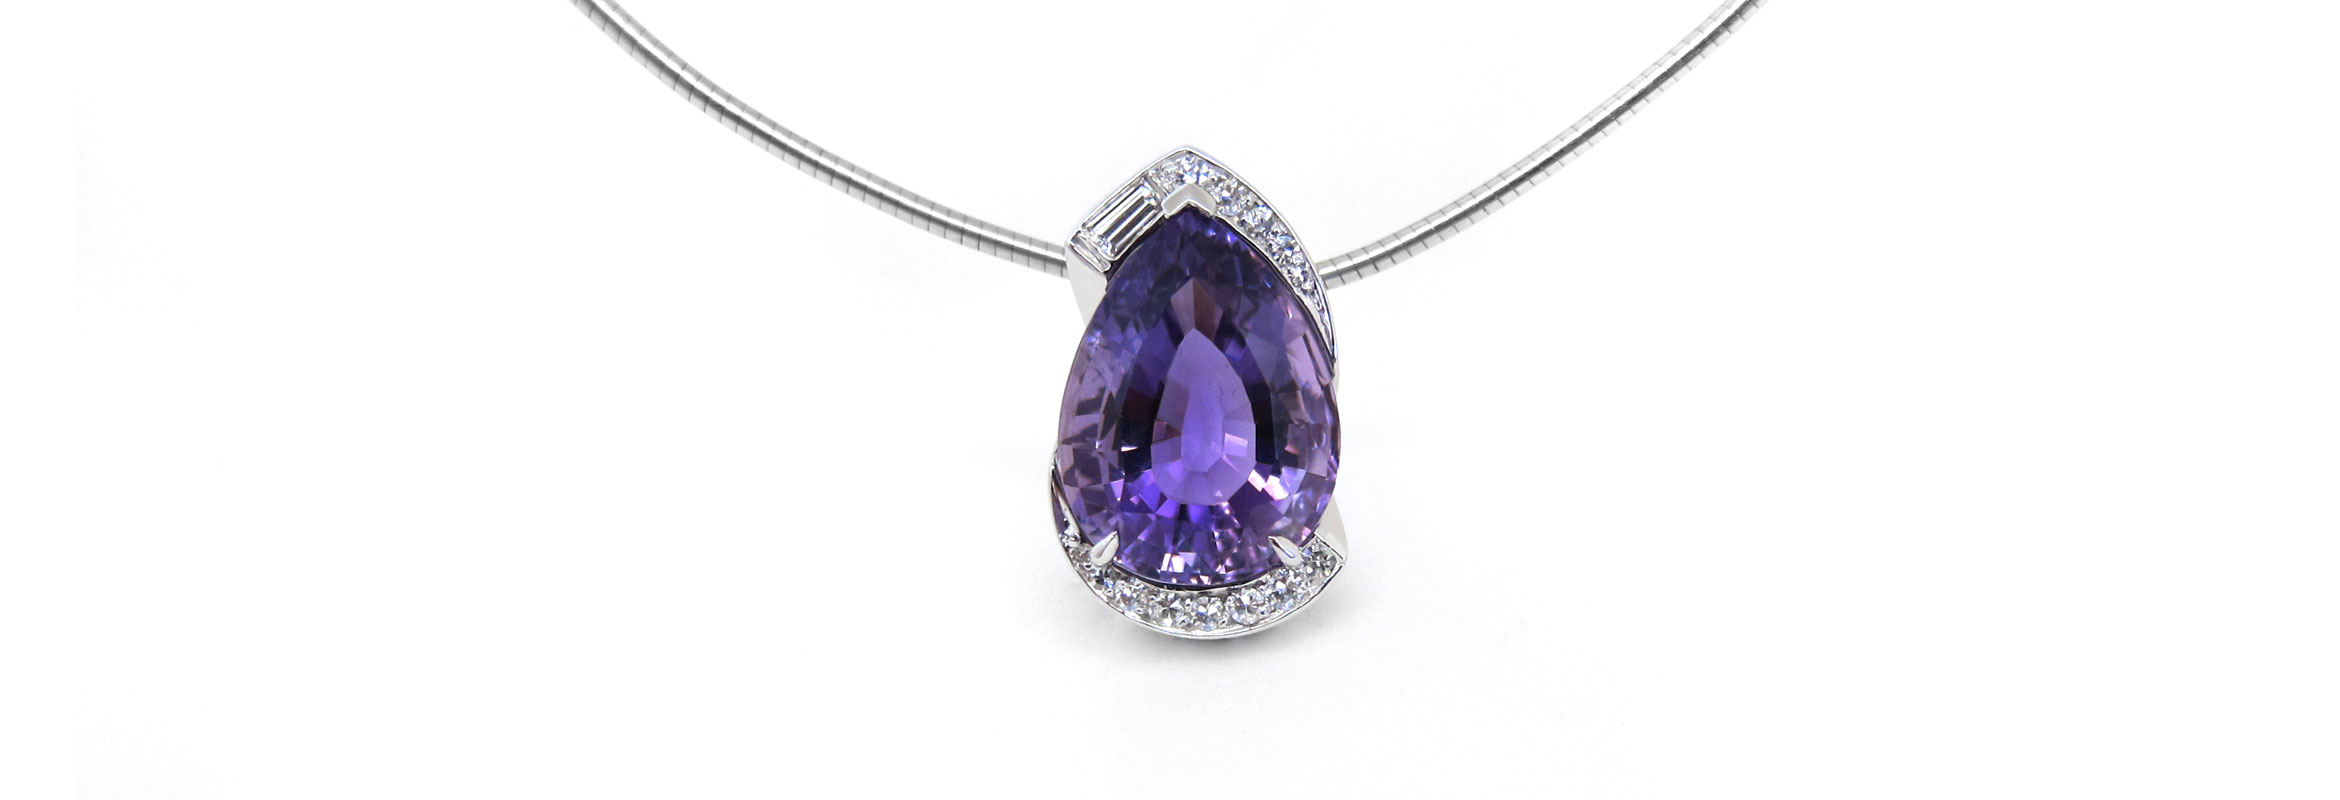 Bespoke pear amethyst necklace in white gold and diamonds, made in Sydney